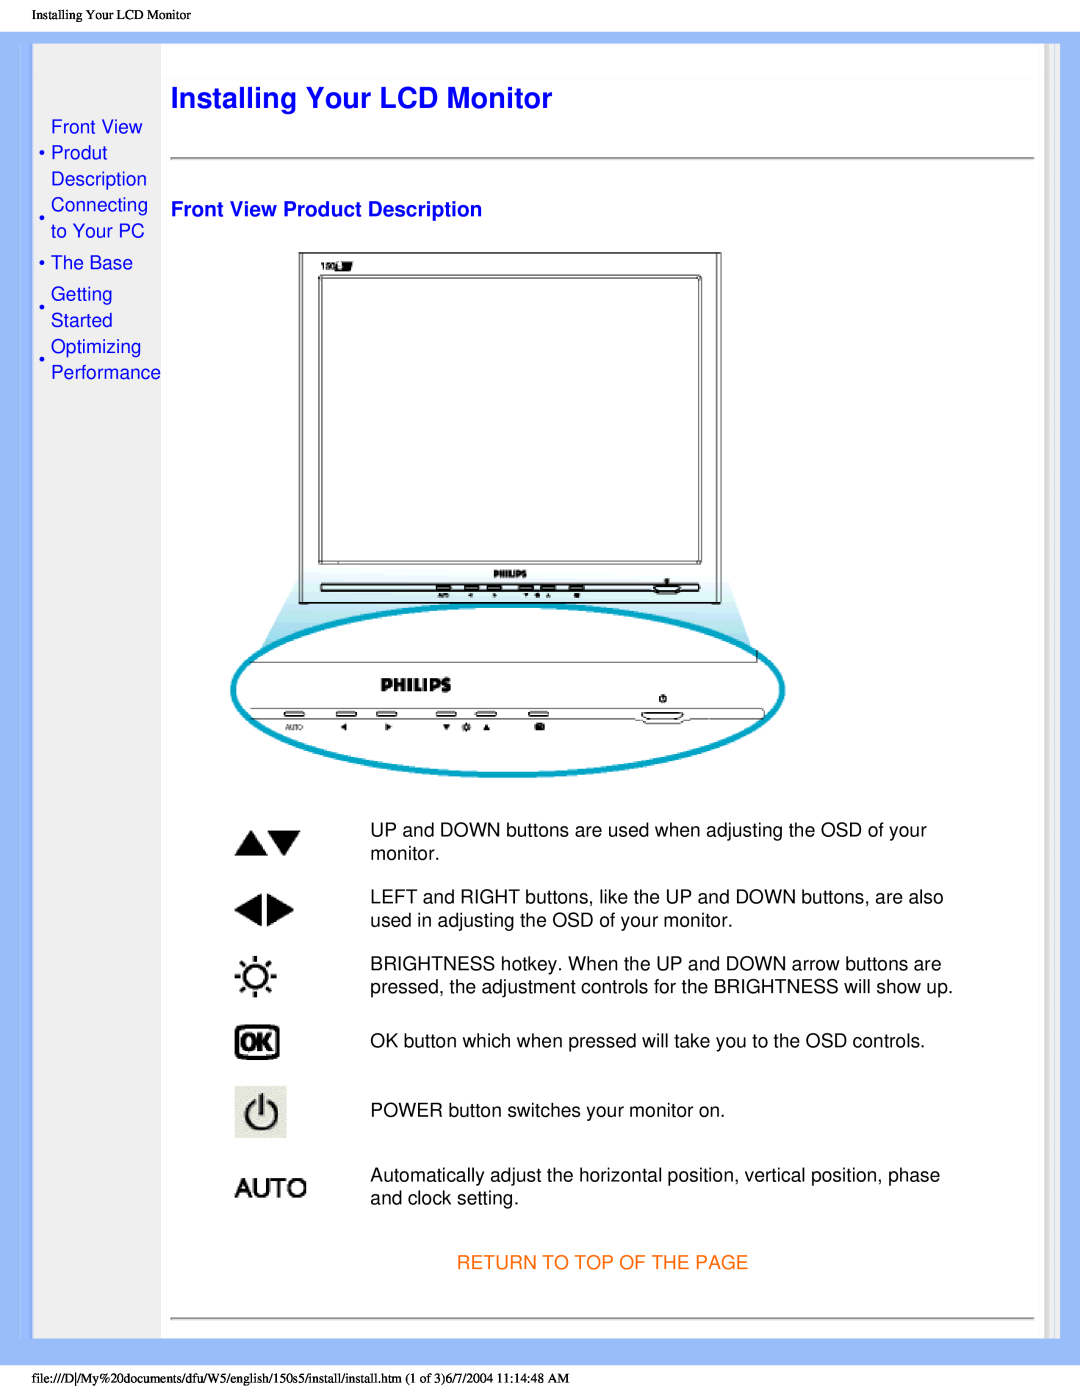 Philips 150S5FS user manual Installing Your LCD Monitor, Front View Product Description, Return To Top Of The Page 